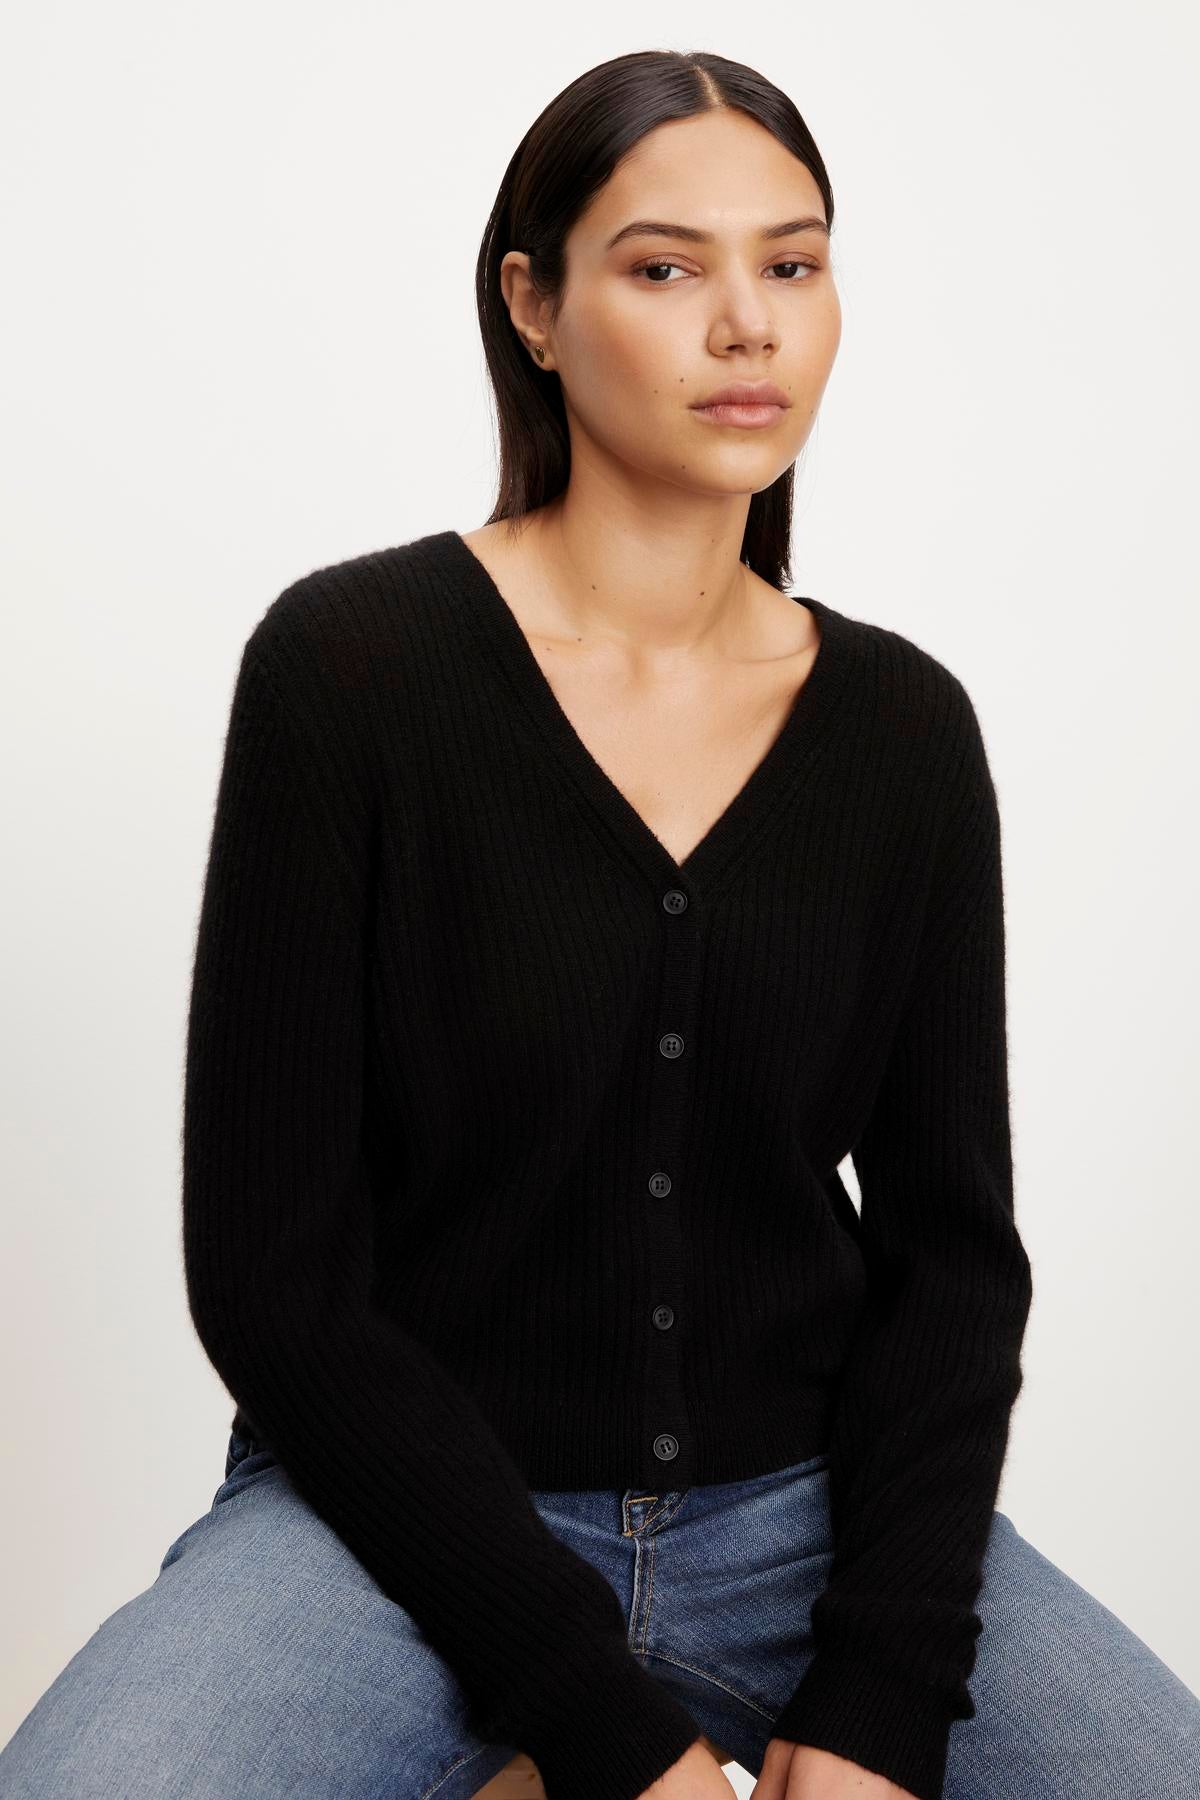 The model is wearing a Coralie Cashmere Cardigan by Velvet by Graham & Spencer.-35655685112001